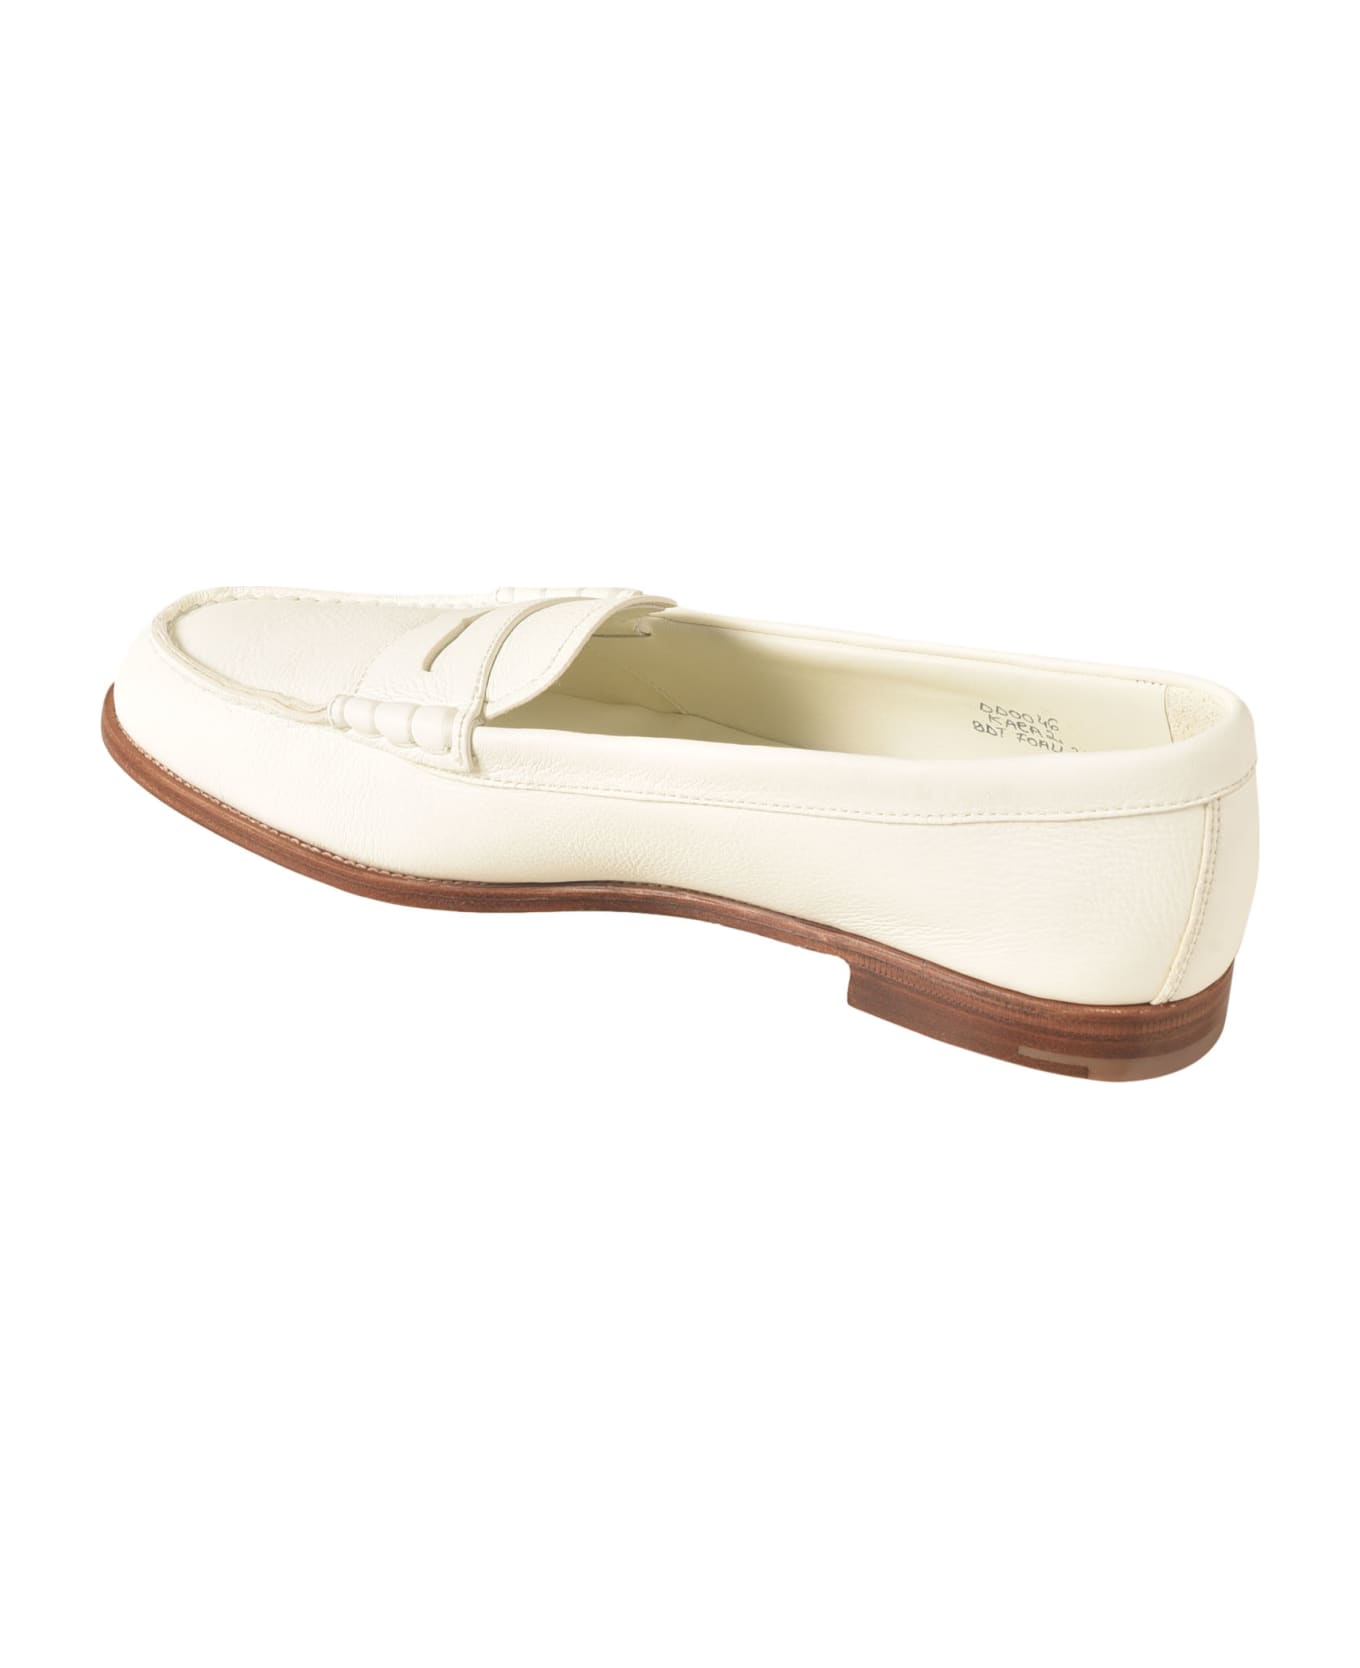 Church's Classic Loafers - Avorio